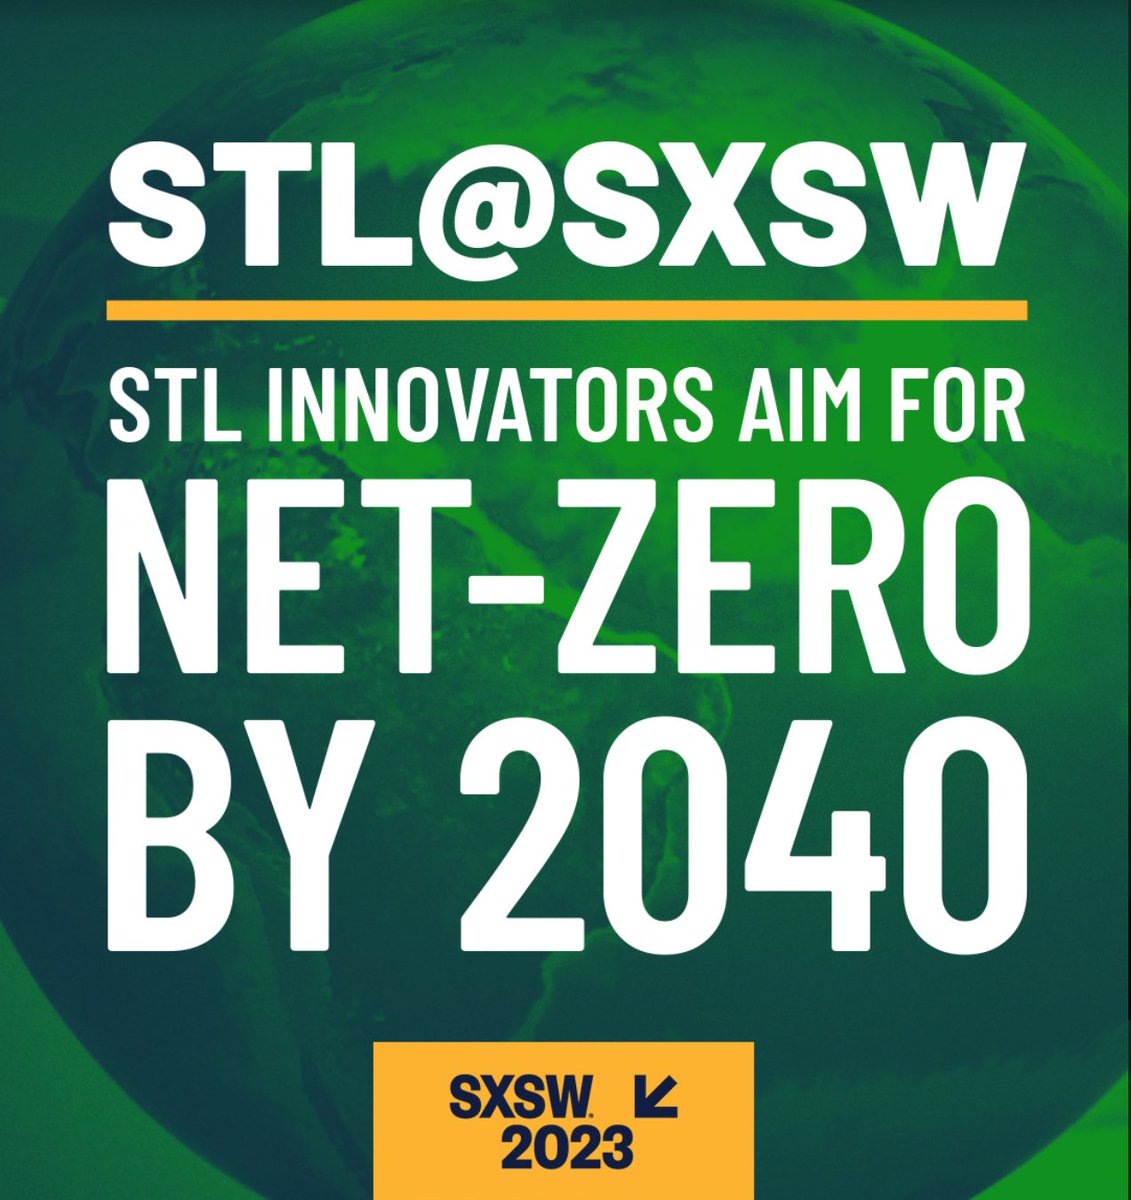 Packing my bags for a (work?) trip to Austin #SWSW, joining #STLMade leaders @bobelf, @NickReinke3, and @WUSTL's Dedric Carter for a talk about #netzero and how #farmers and #agtech can have positive impact along with some of the challenges. What do you think, hype or hope?